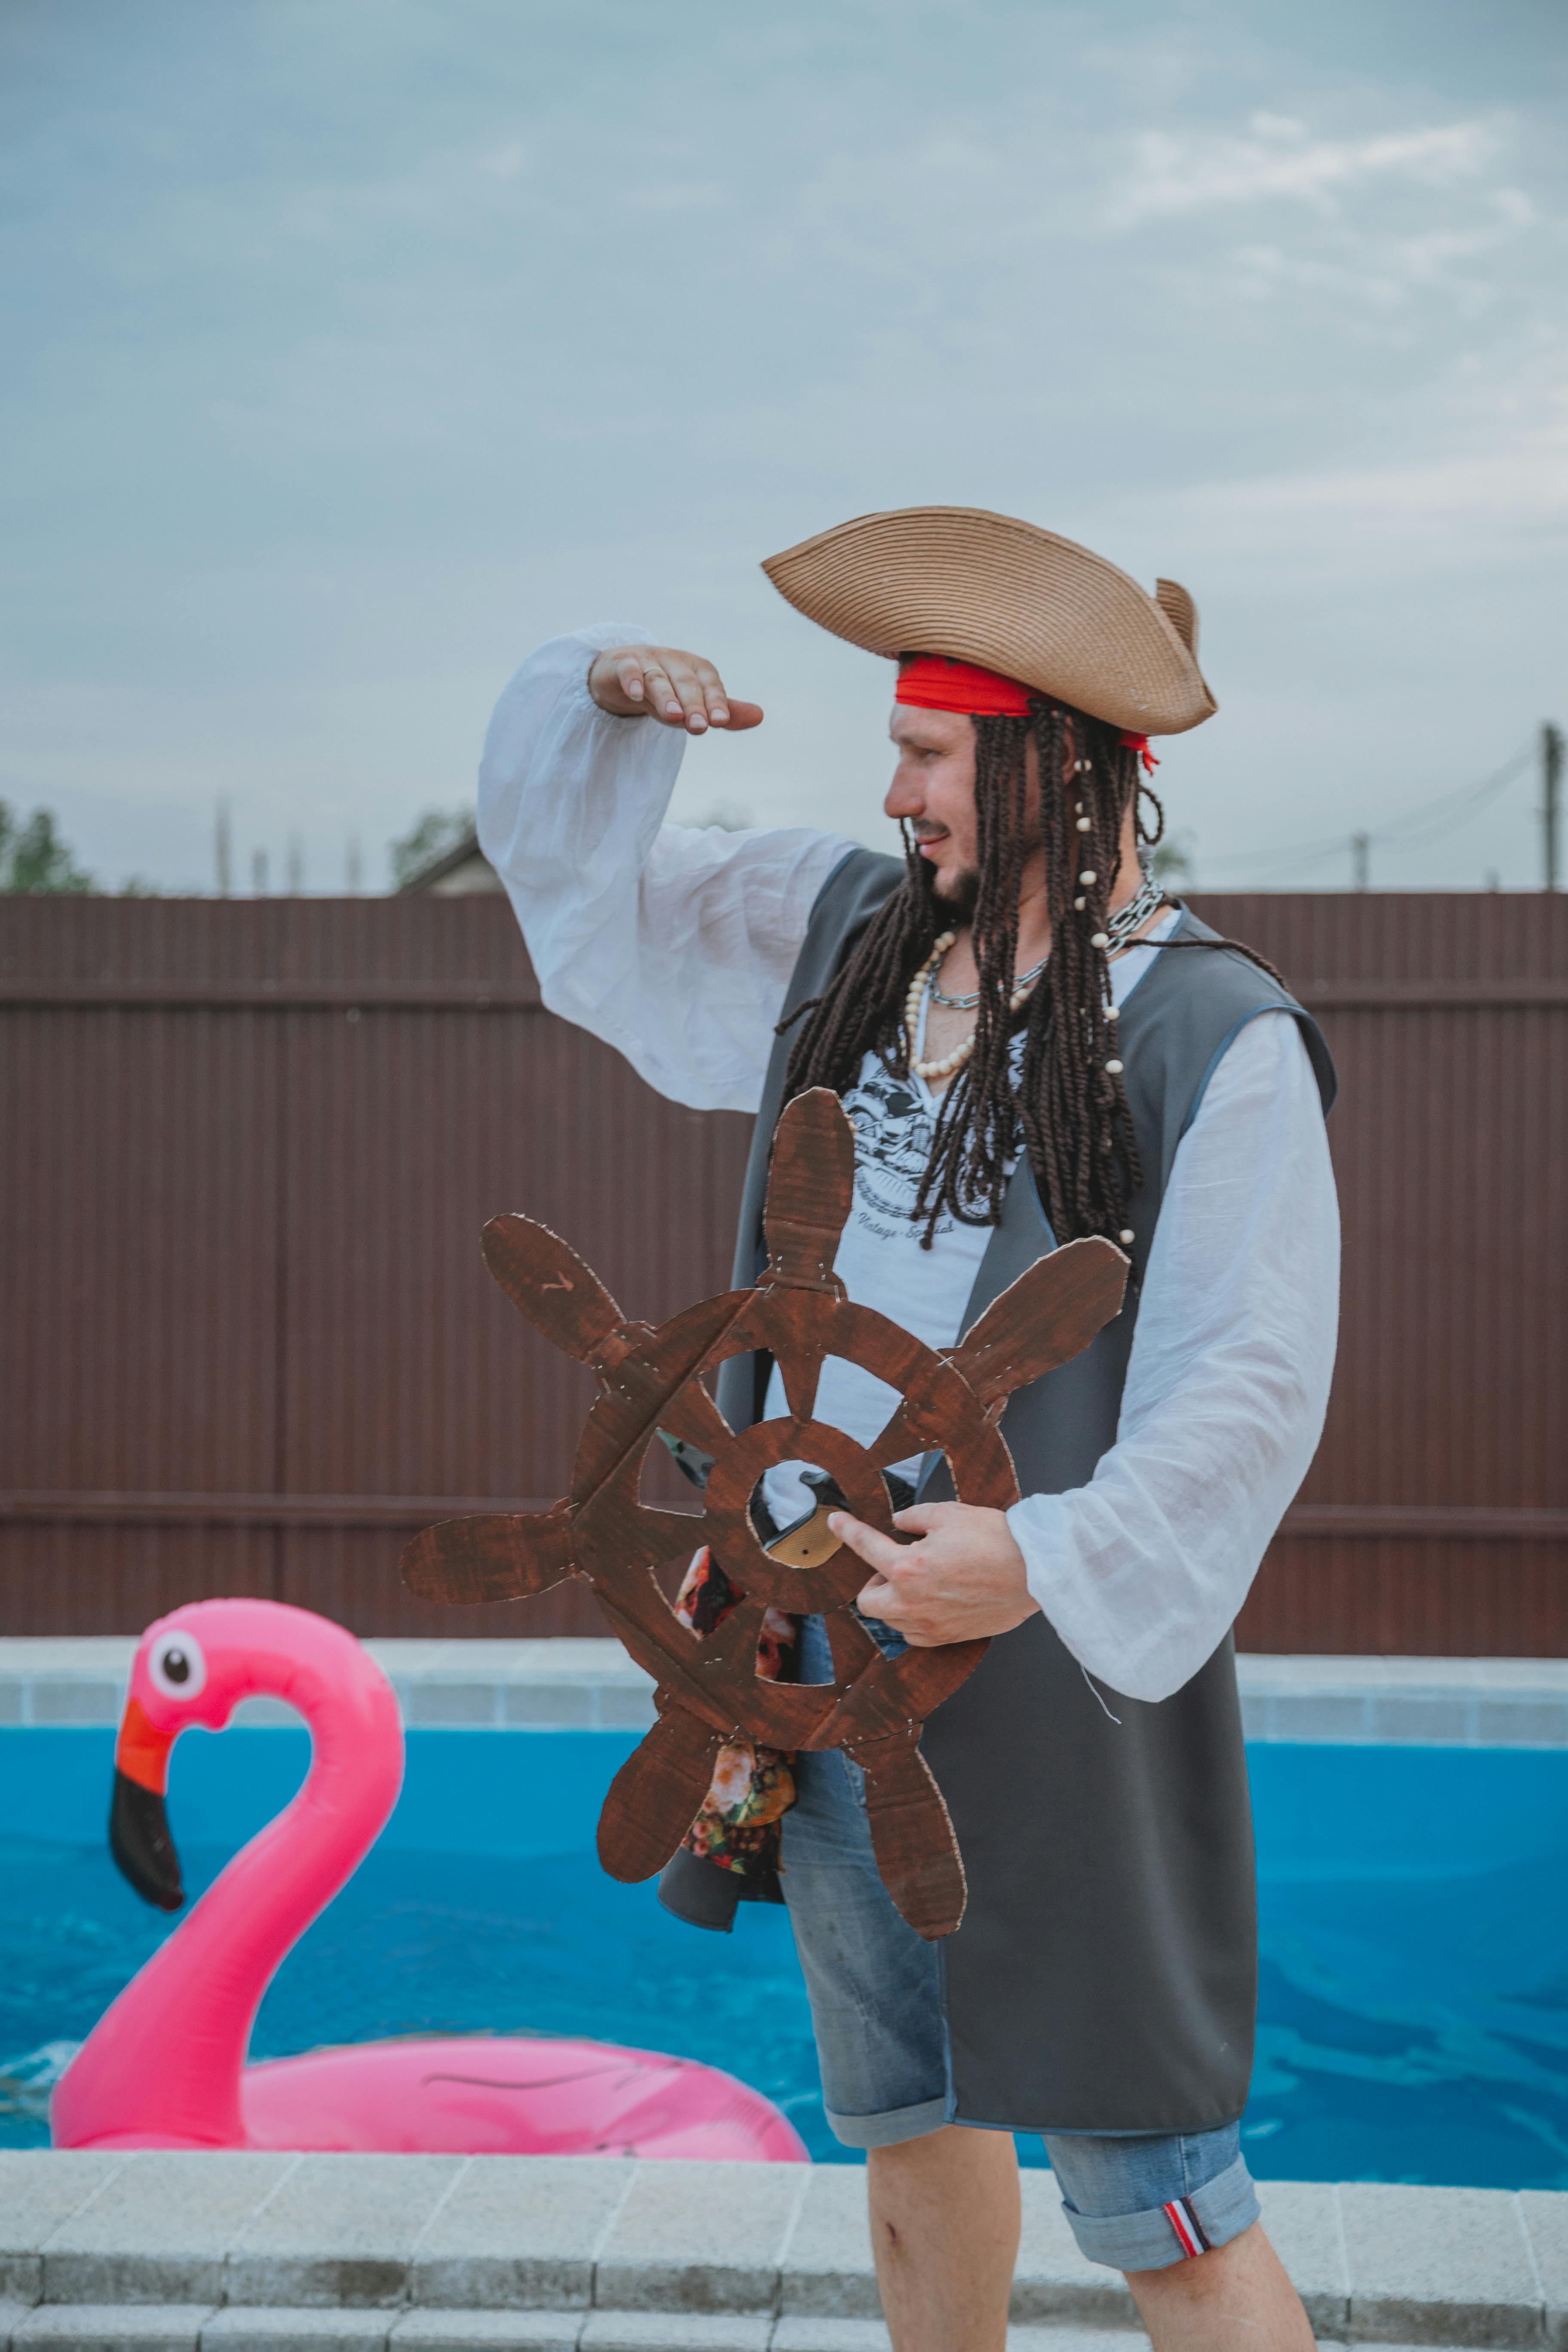 Read on below for some handy tips to host such an exciting pirates party to relish some of the motifs inherent to this theme: